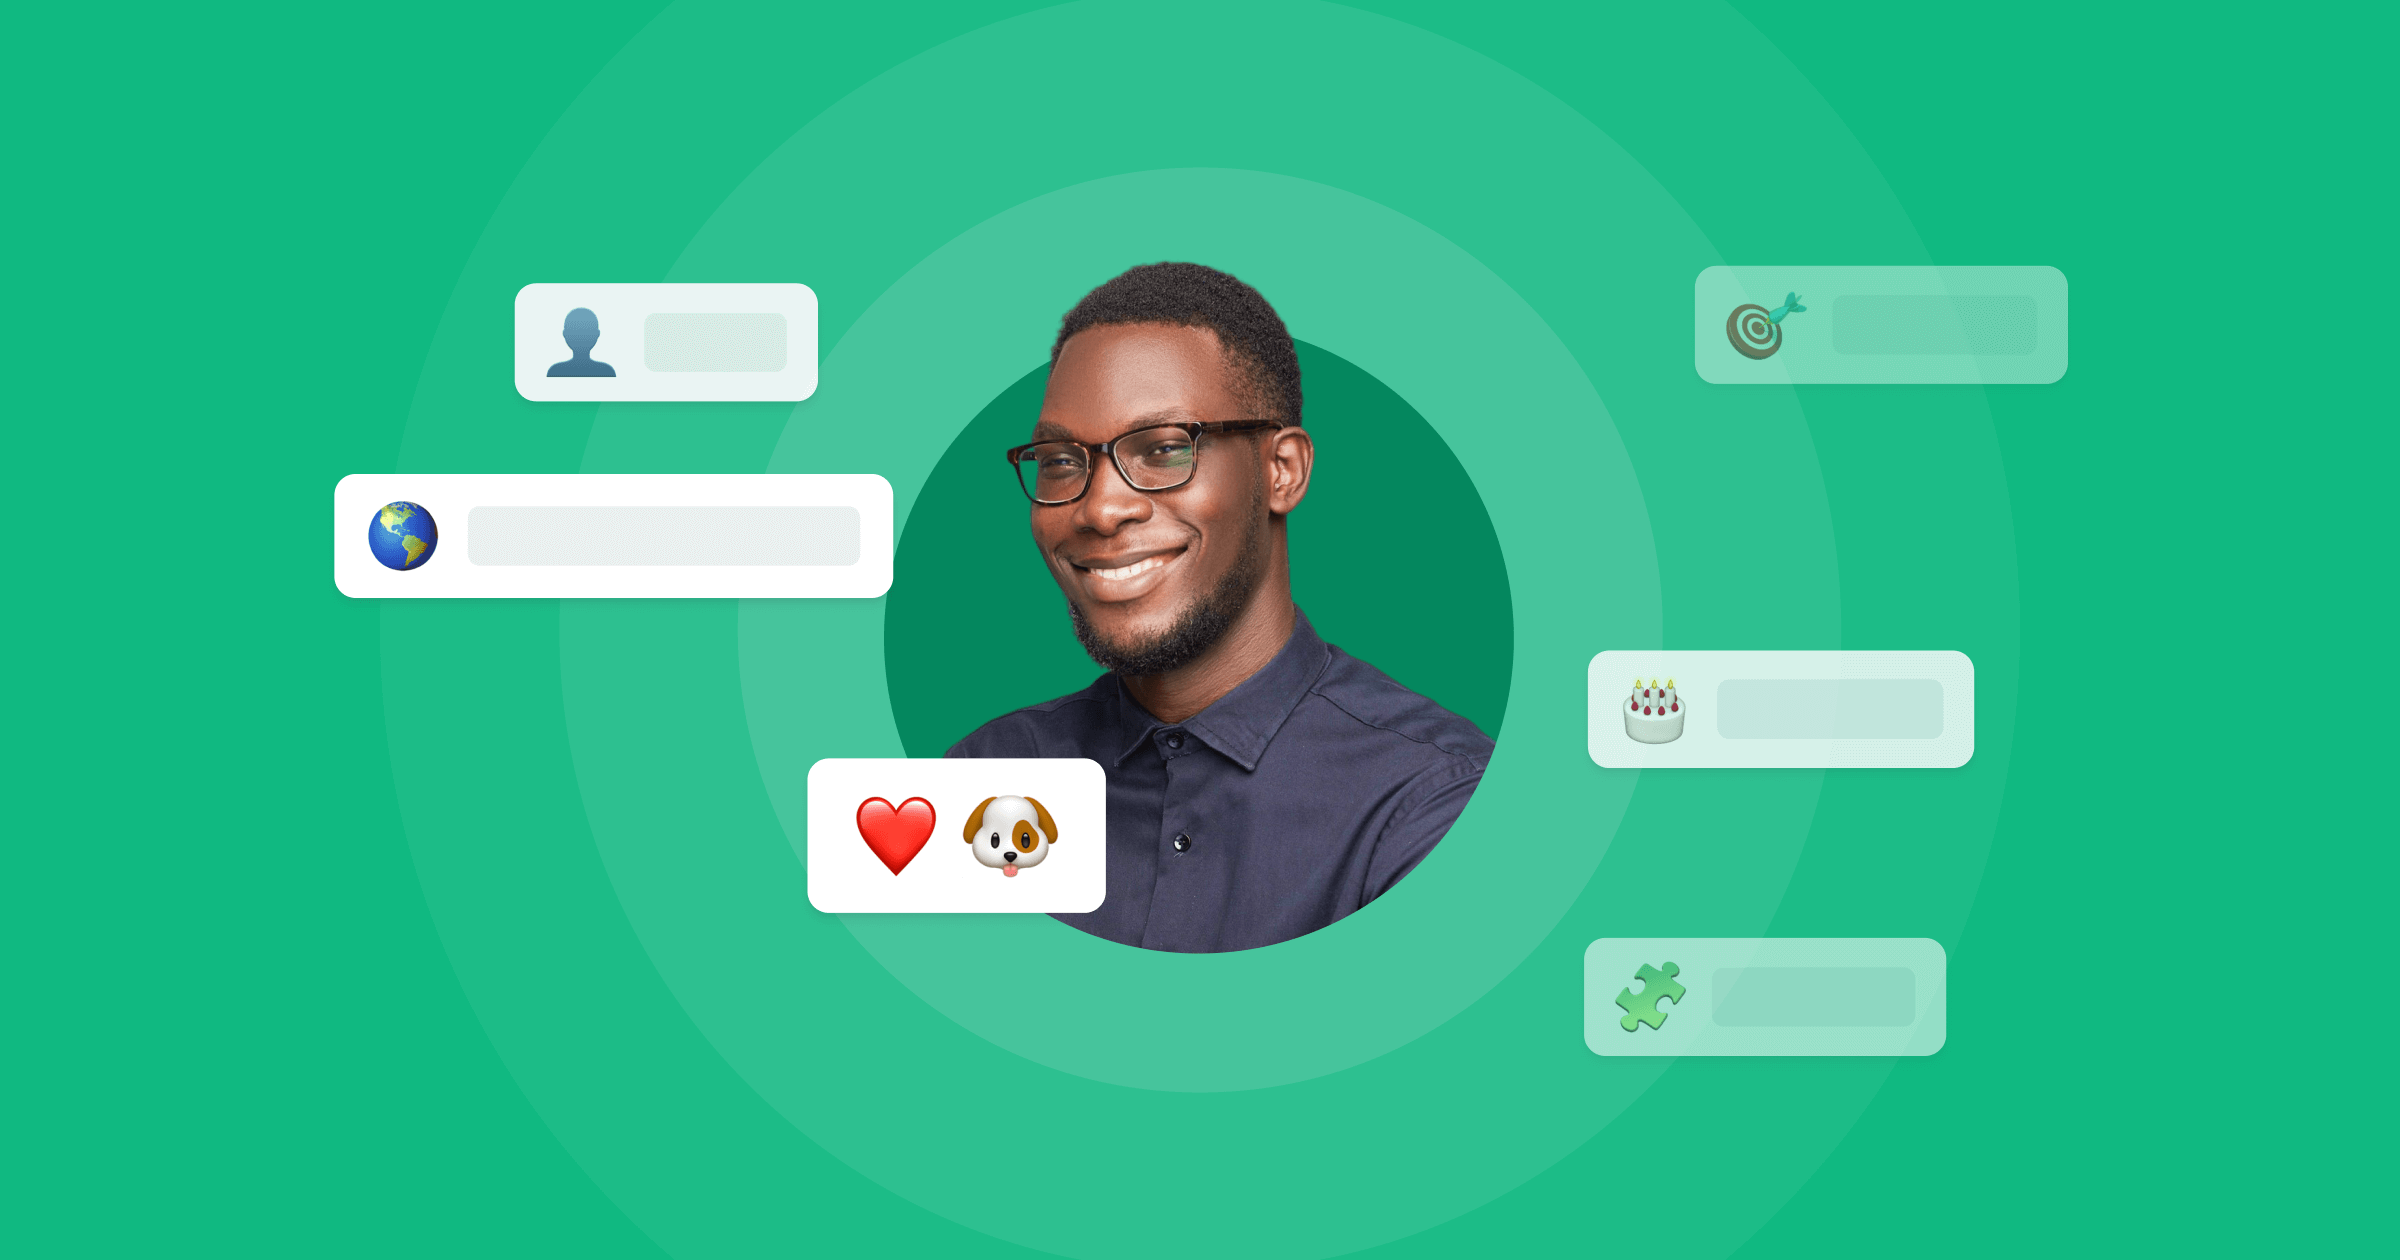 A man surrounded by emojis that represent his user profile attributes.